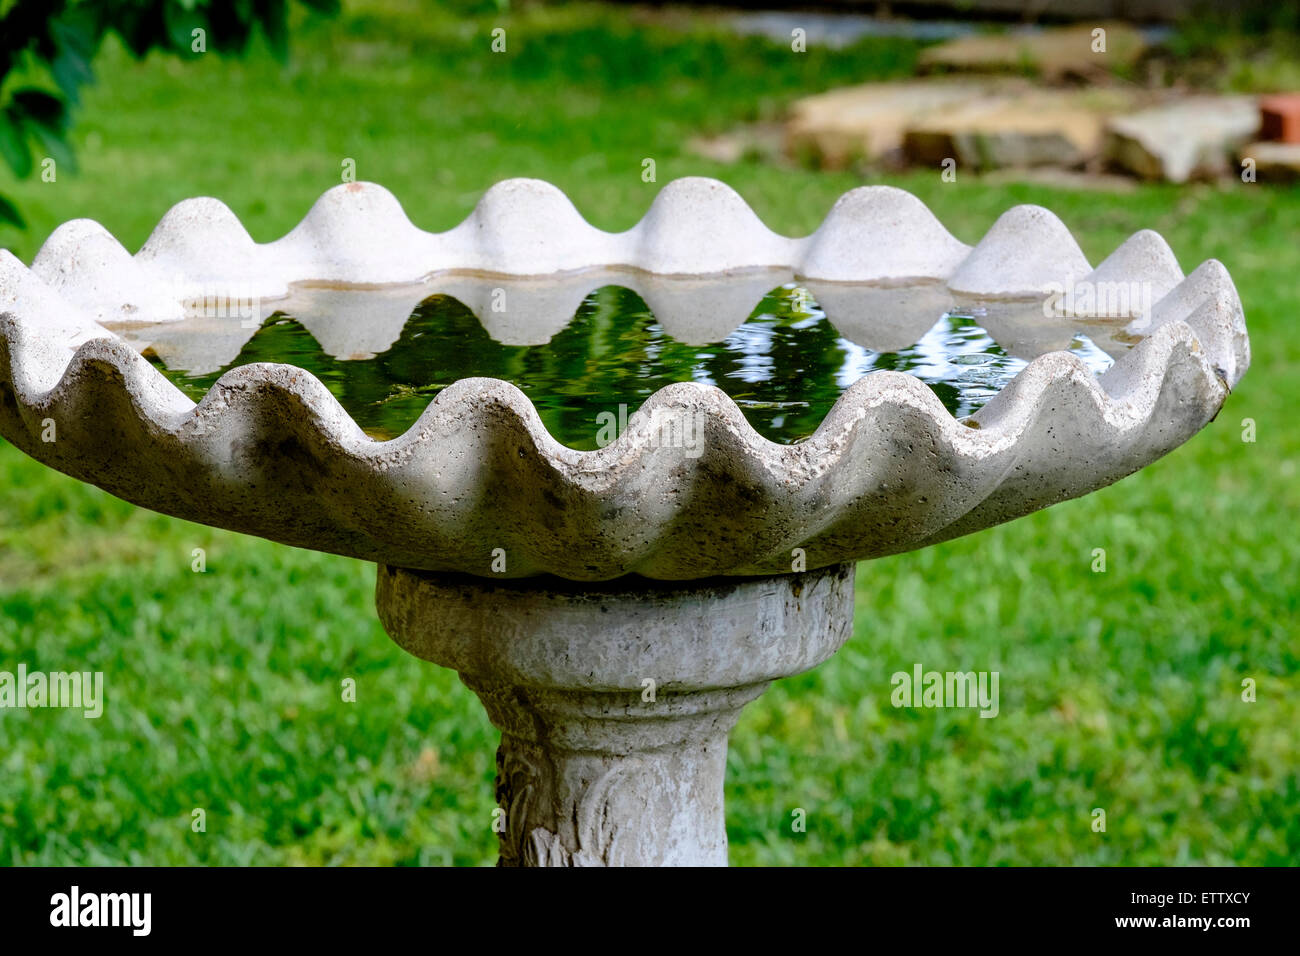 A concrete bird bath full of water in the spring. Reflection, lawn. Stock Photo